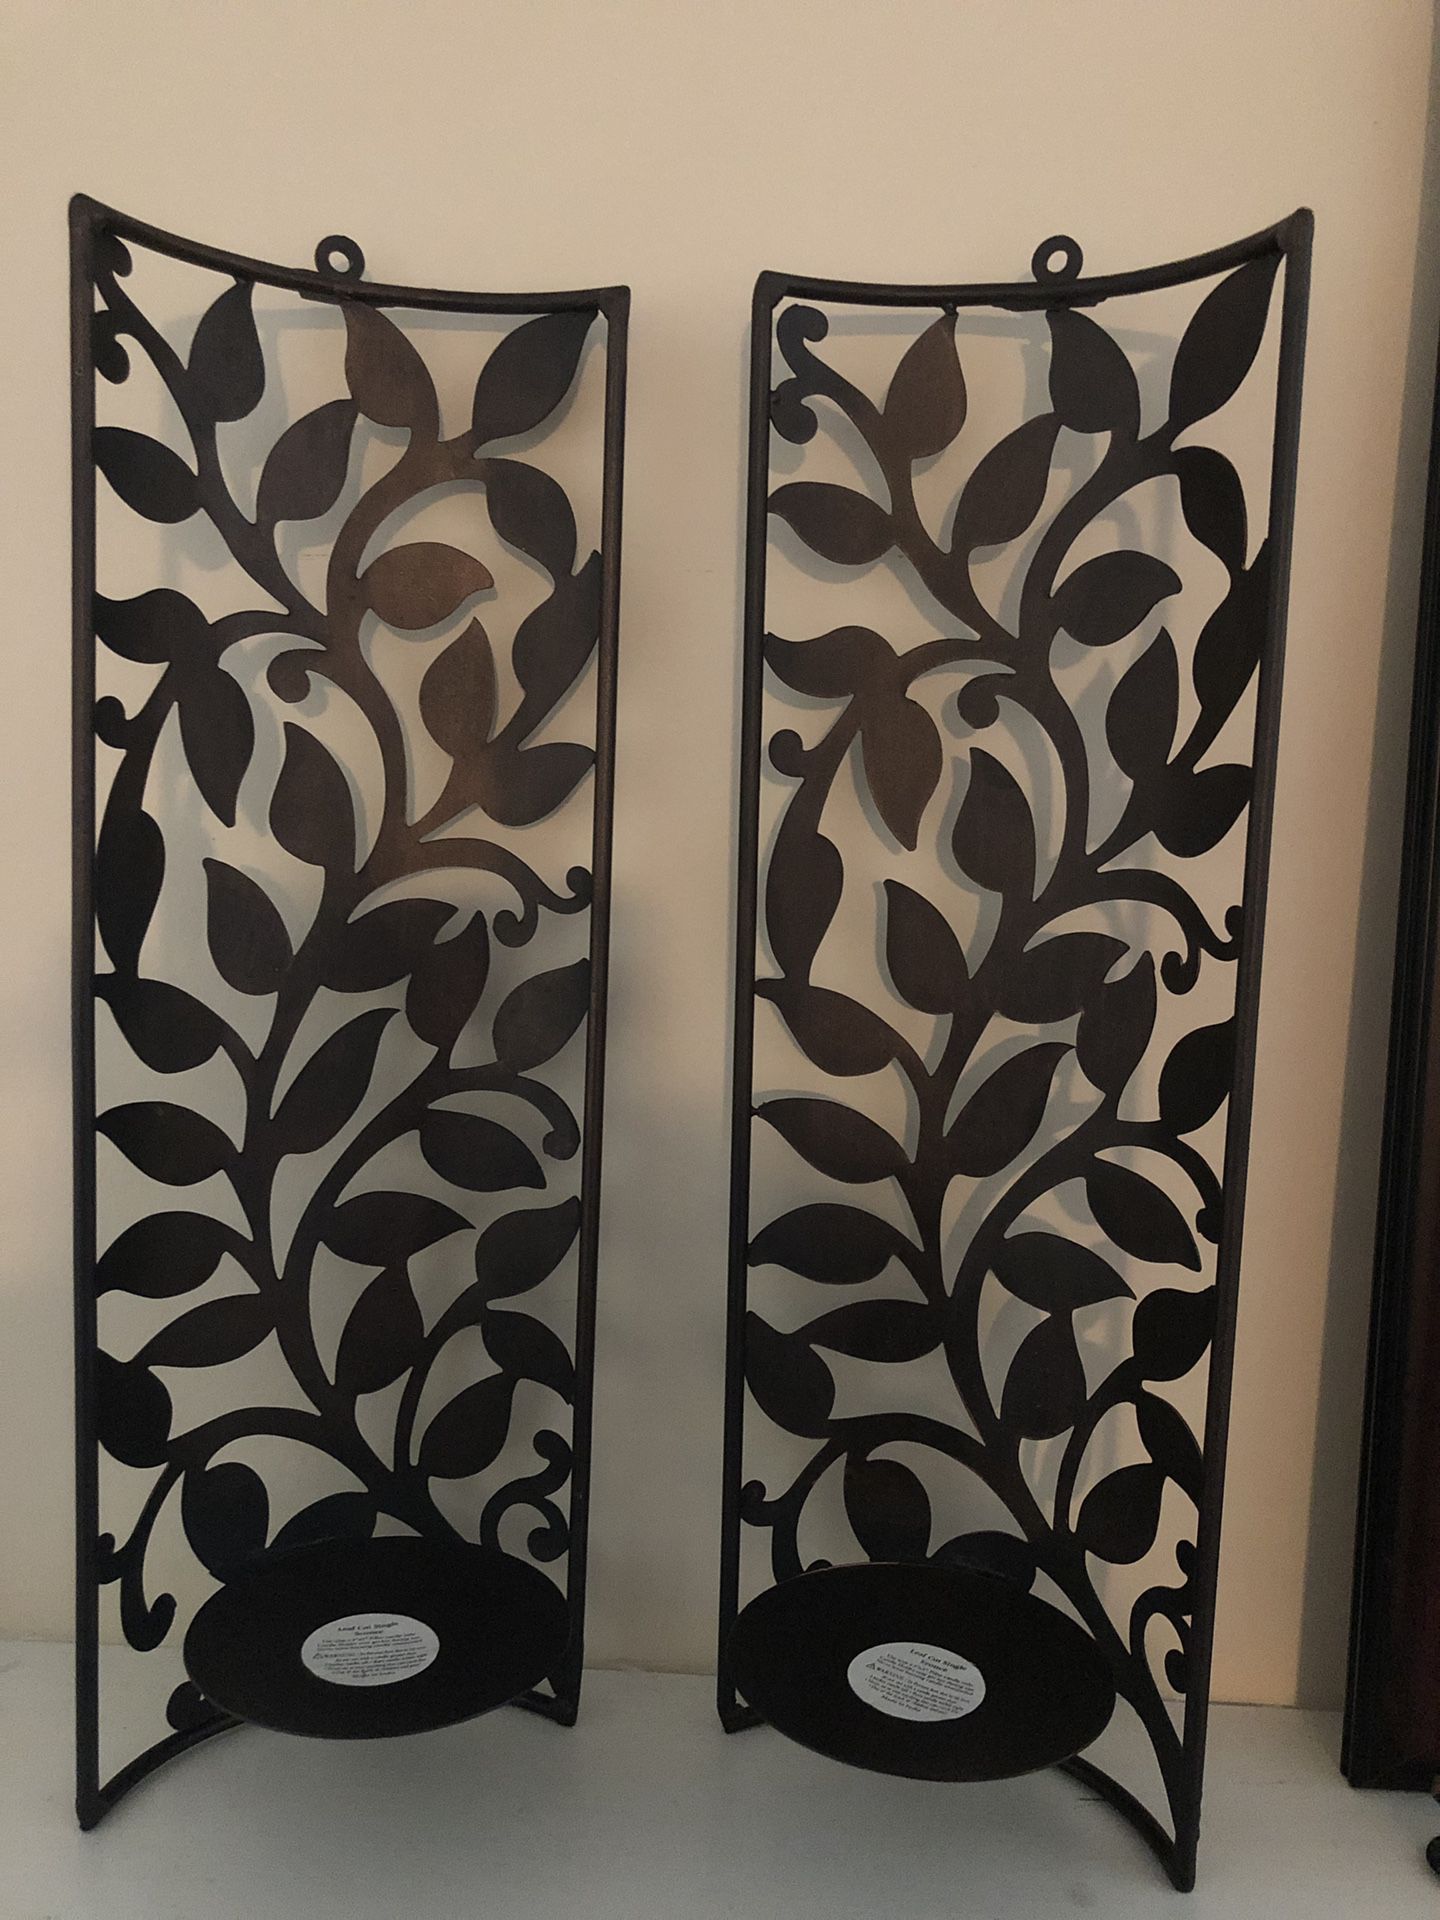 Pier 1 Wall Sconces-$15 for pair